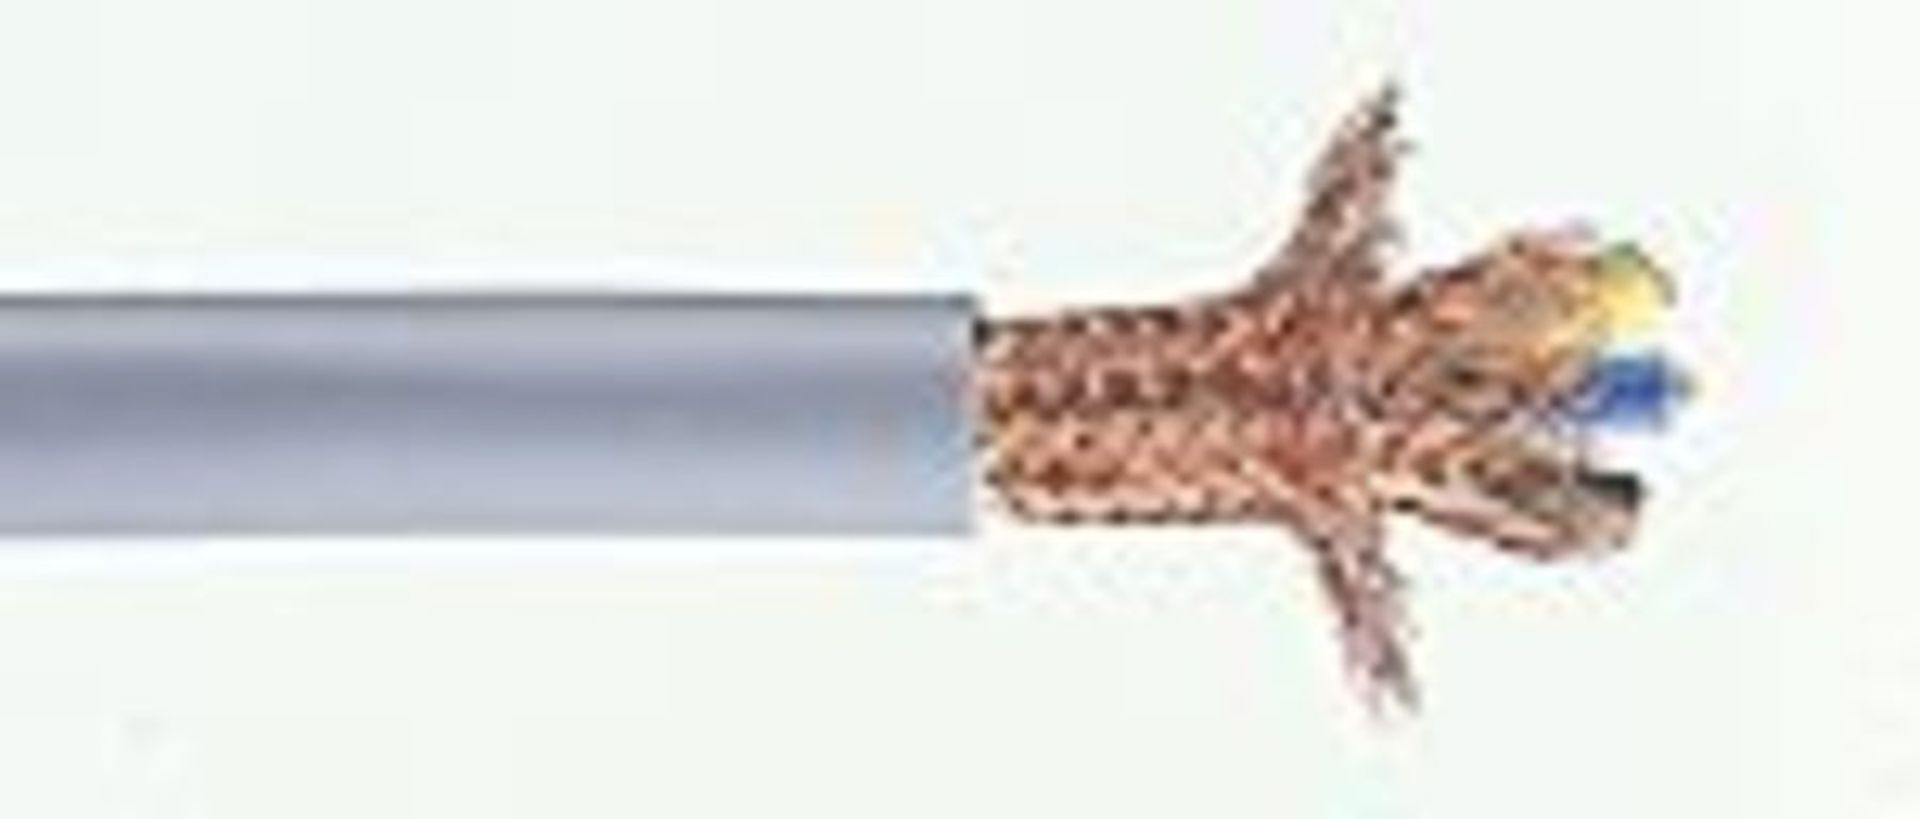 3 Core 4 (Power) mm², 6 (Earth) mm² Mains Power Cable, Grey Polyvinyl Chloride PVC Sheath 50m, 30 A - Image 2 of 2